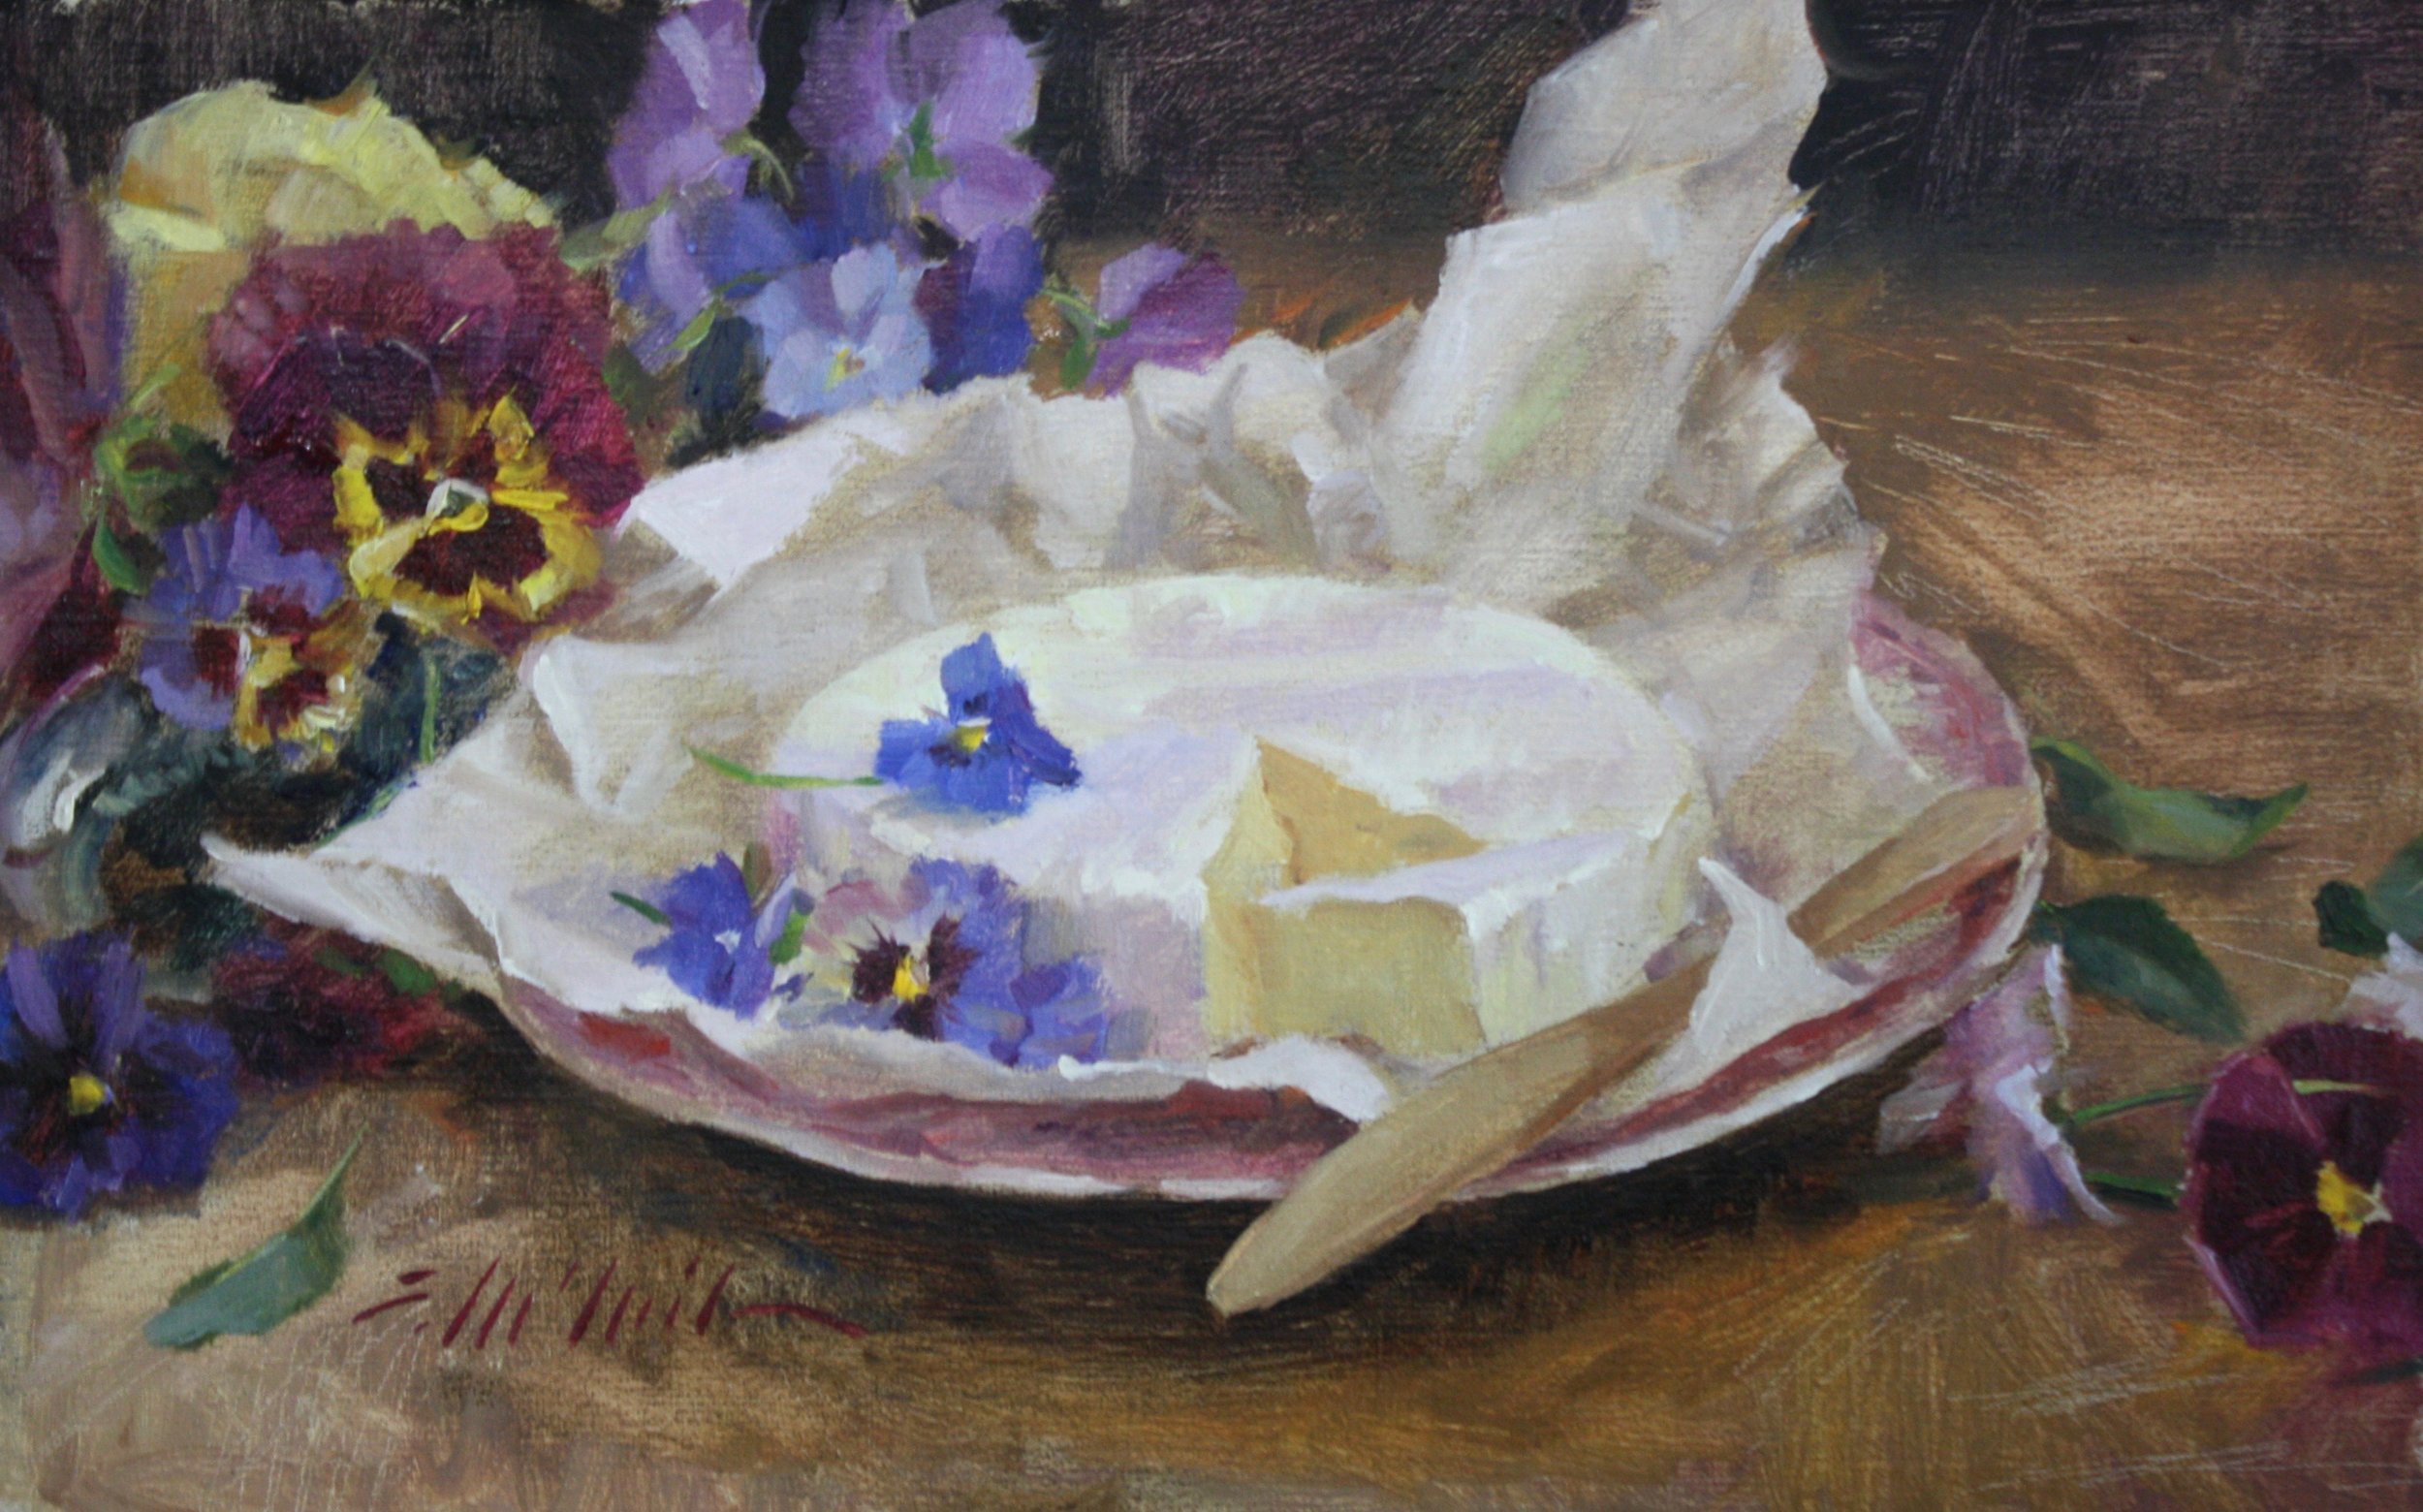 "Brie with Pansies" 7.5x12 $350